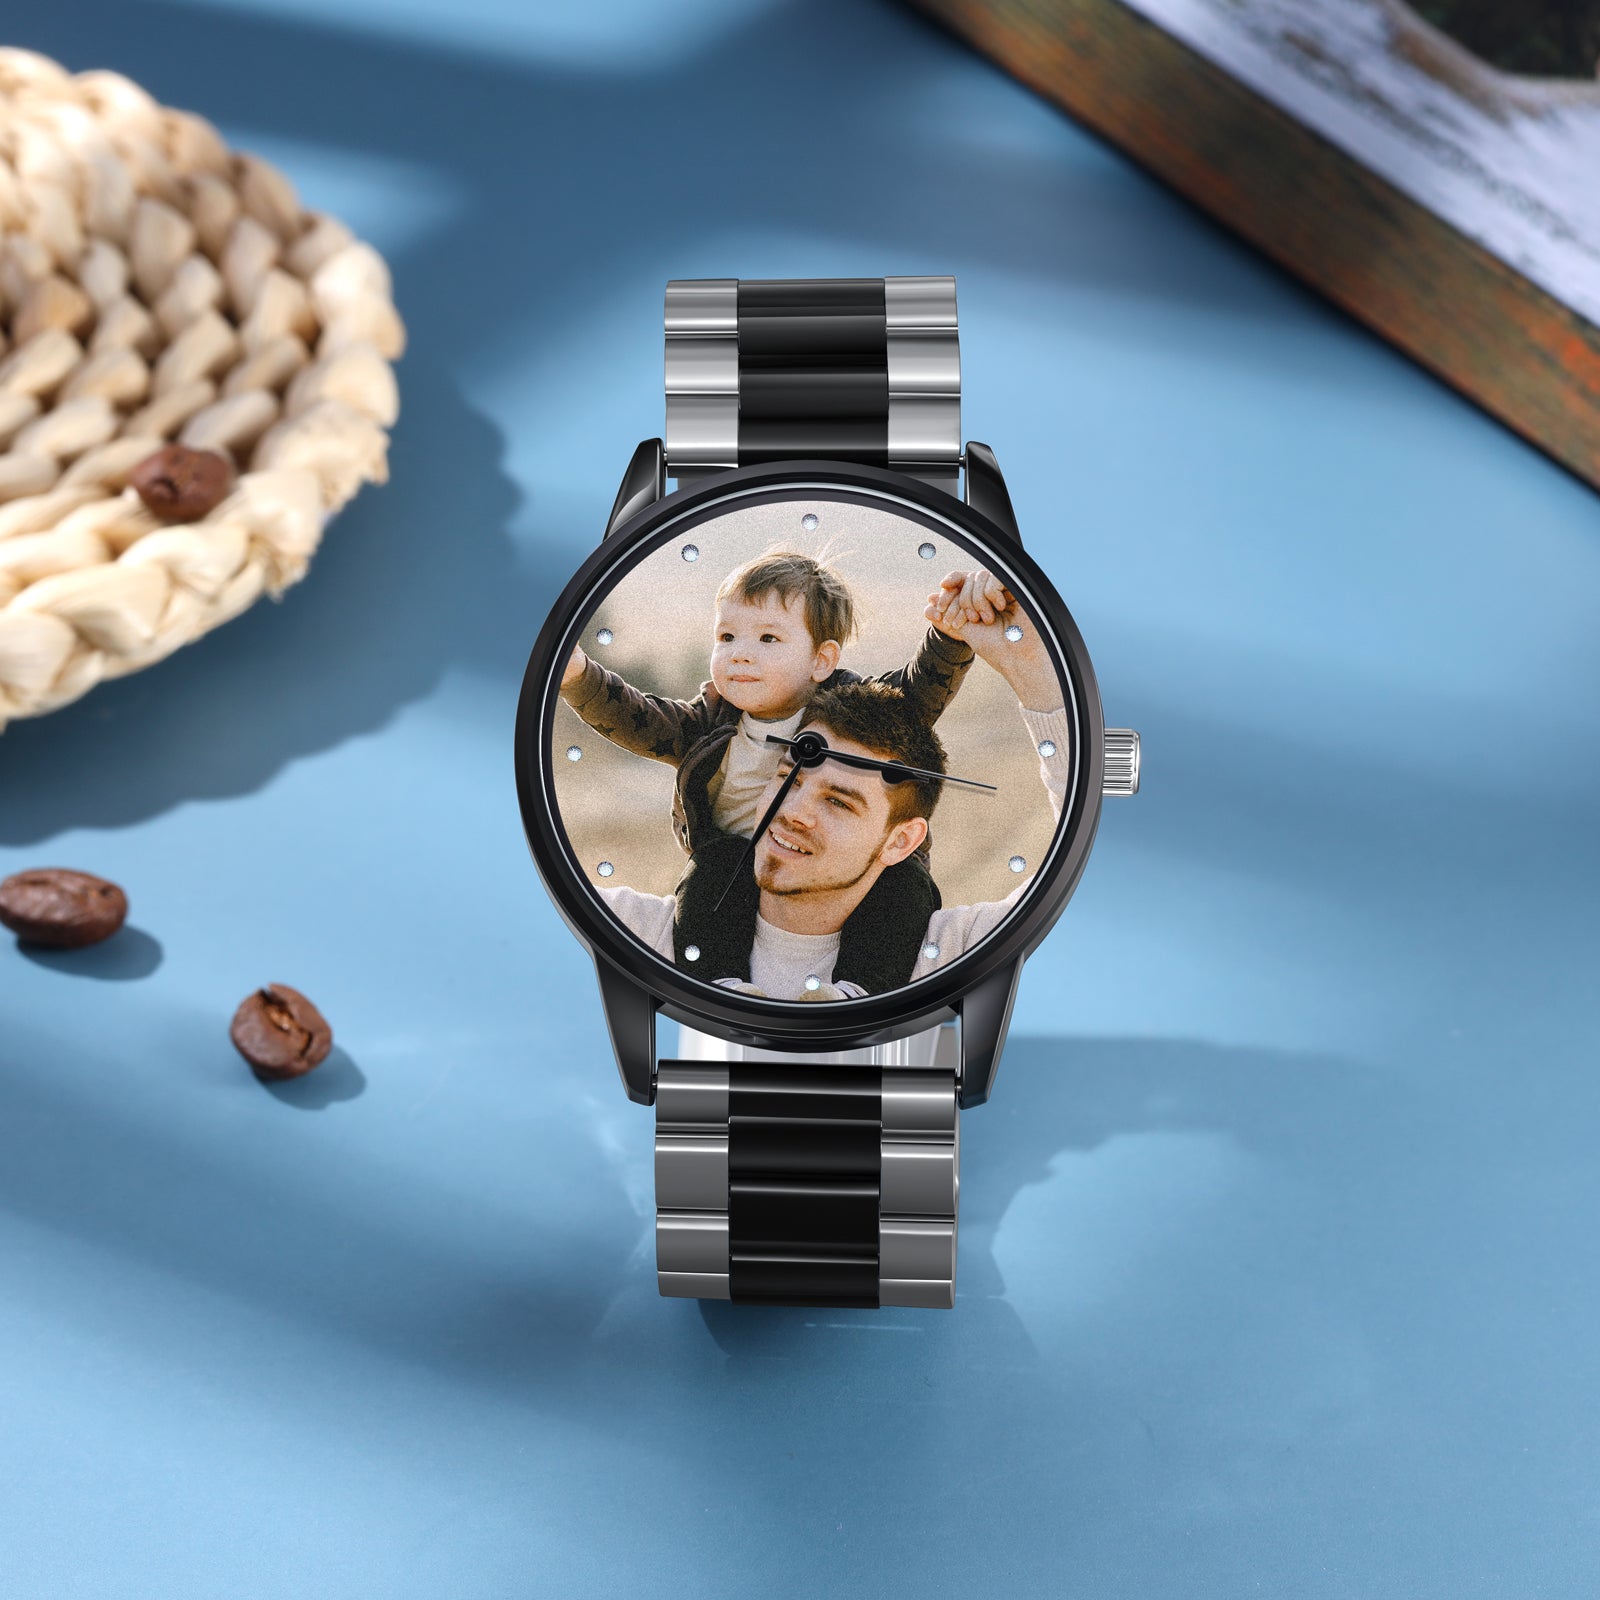 ThinkEngraved Custom watch Personalized Men's Custom Photo Watch With Engraving Father's Day Boyfriend